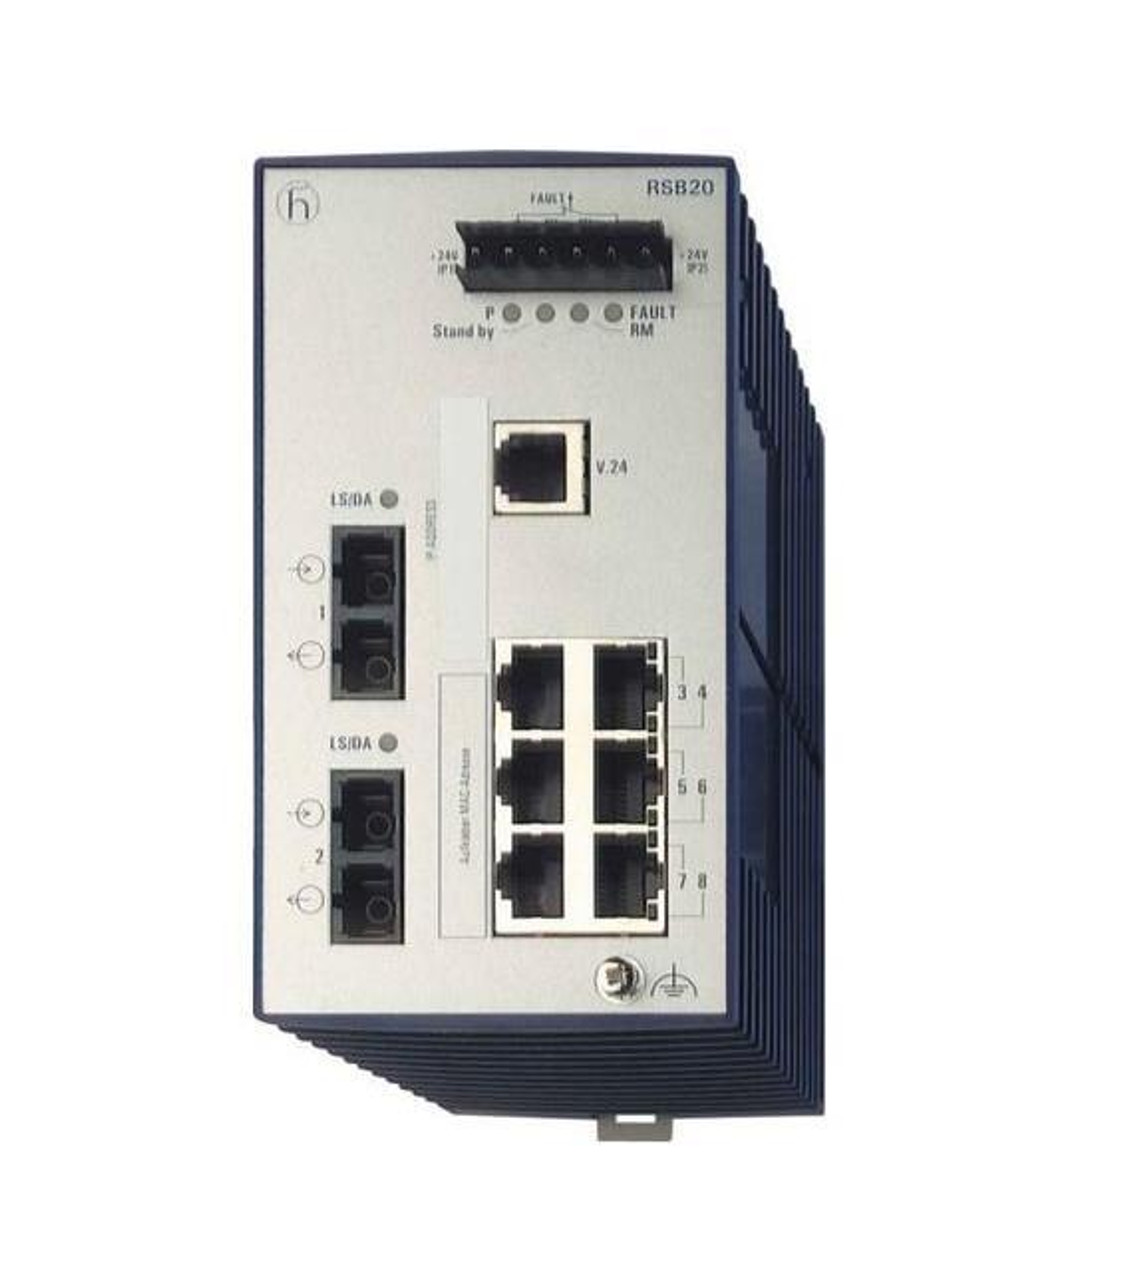 Hirschmann Mananaged Industrial Ethernet Rail Switch (Extended Temperature) with 8 Ports including 6 RJ45 Fast (100 Mbps) Copper Ports and 2 Fast